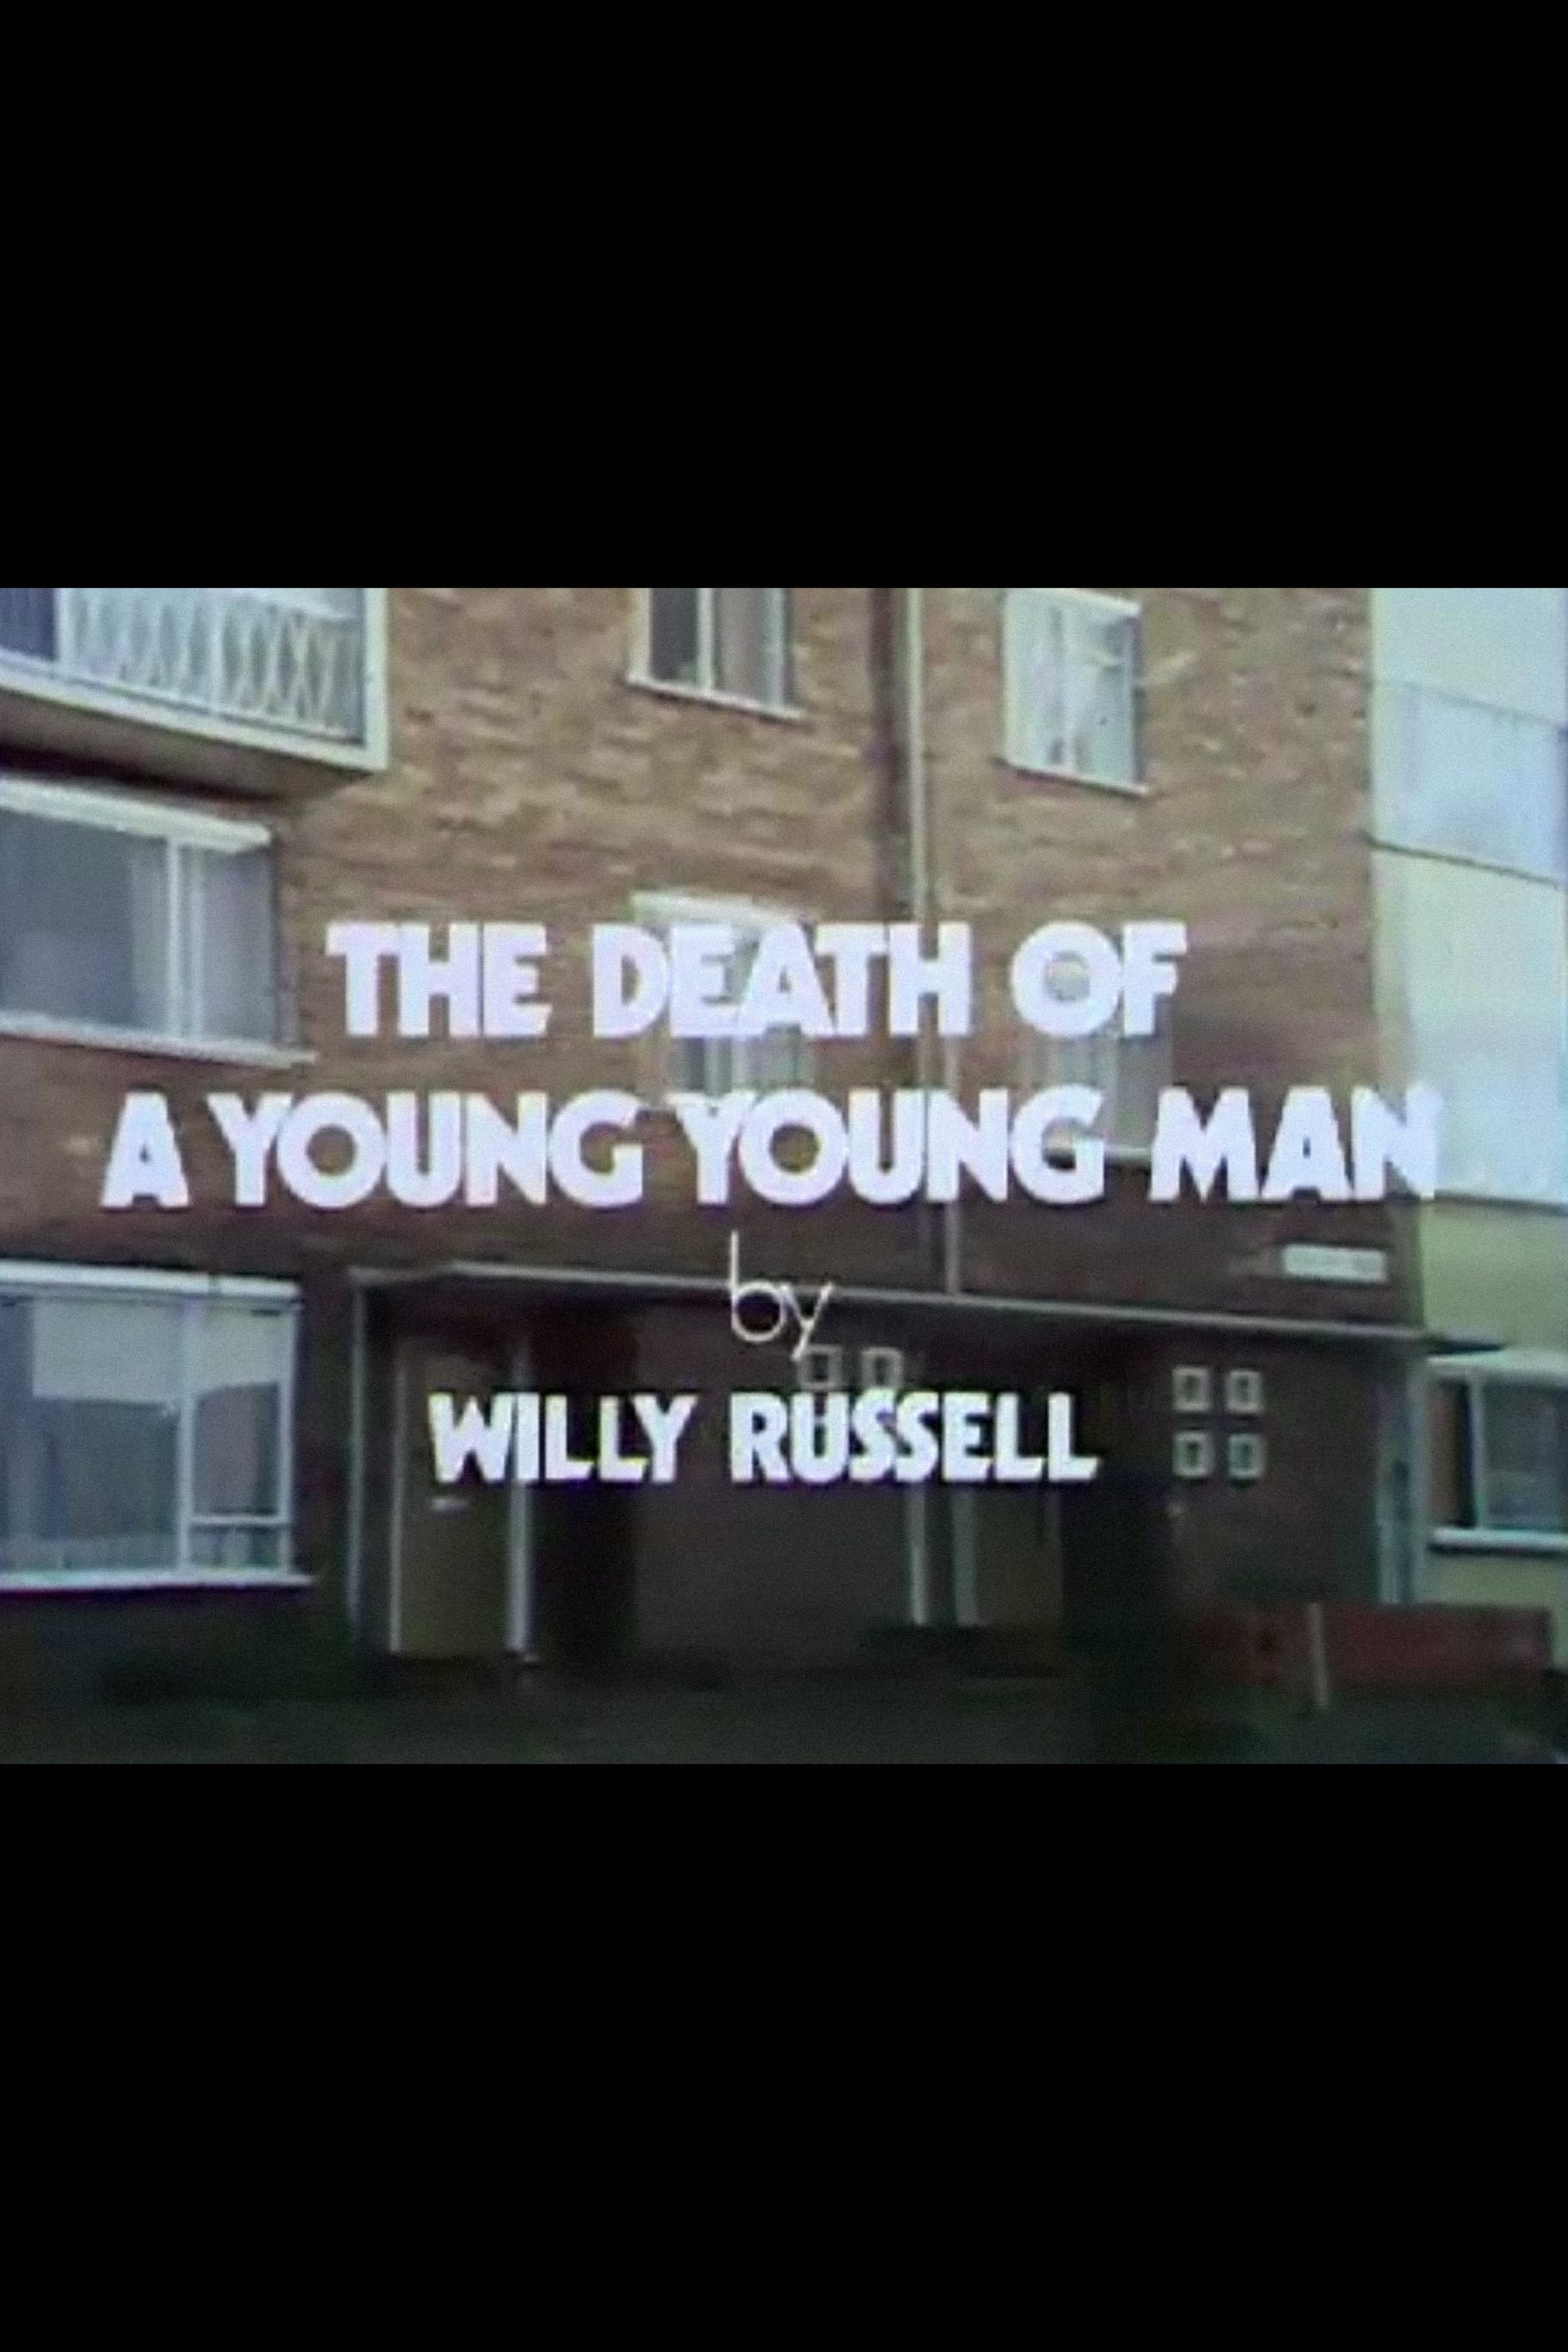 The Death of a Young Young Man